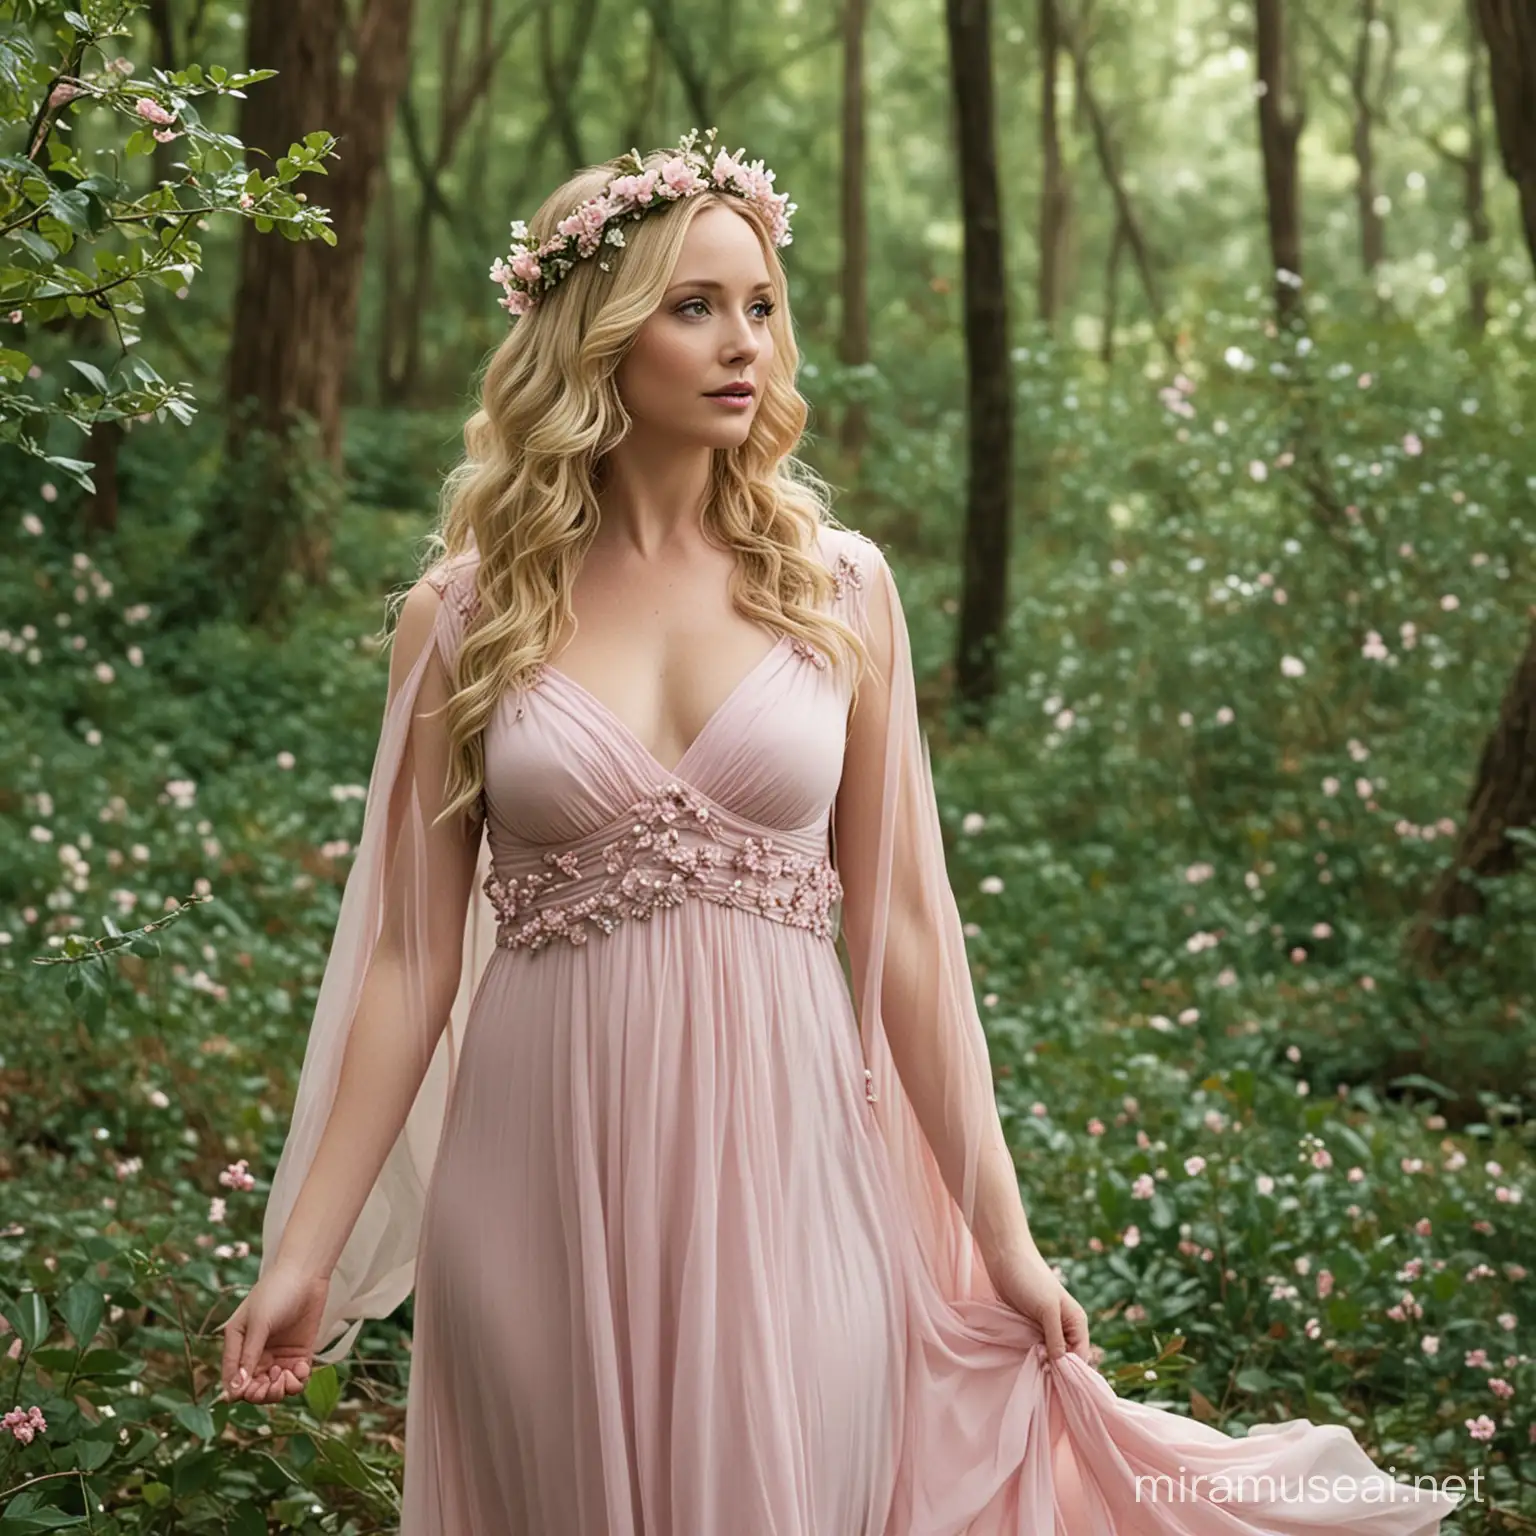 Candice Accola as the Greek goddess Ariadne.  She is alone in a leafy forest.  She is wearing a pale pink Greek dress, and is wearing a crown of ivy leaves and flowers.